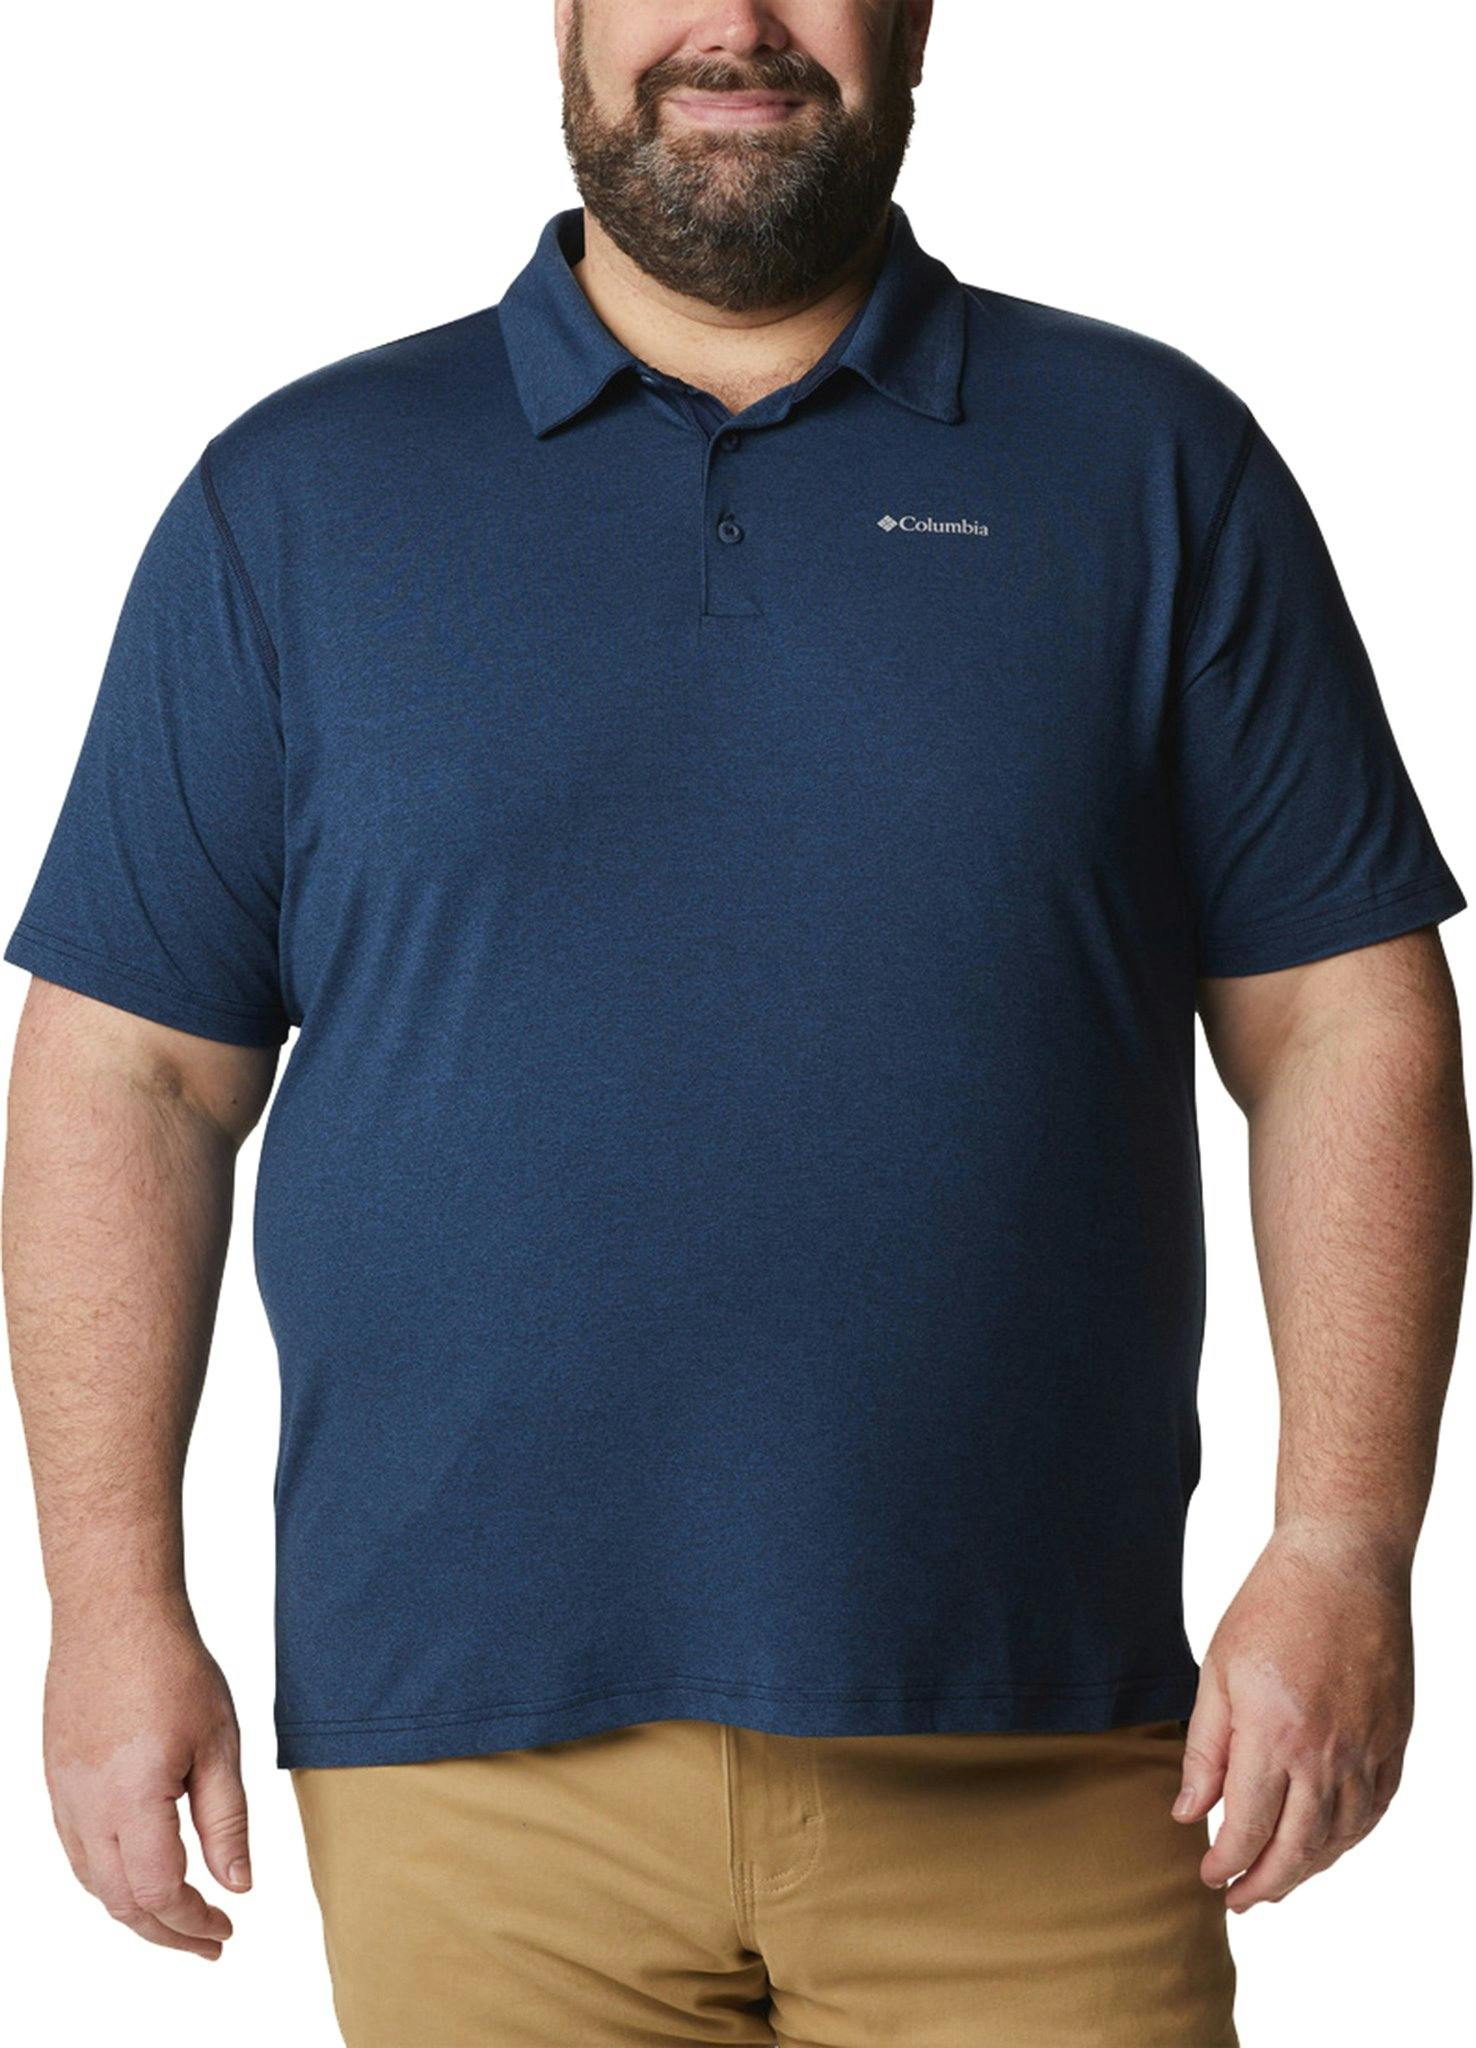 Product image for Tech Trail Polo Big Size - Men's